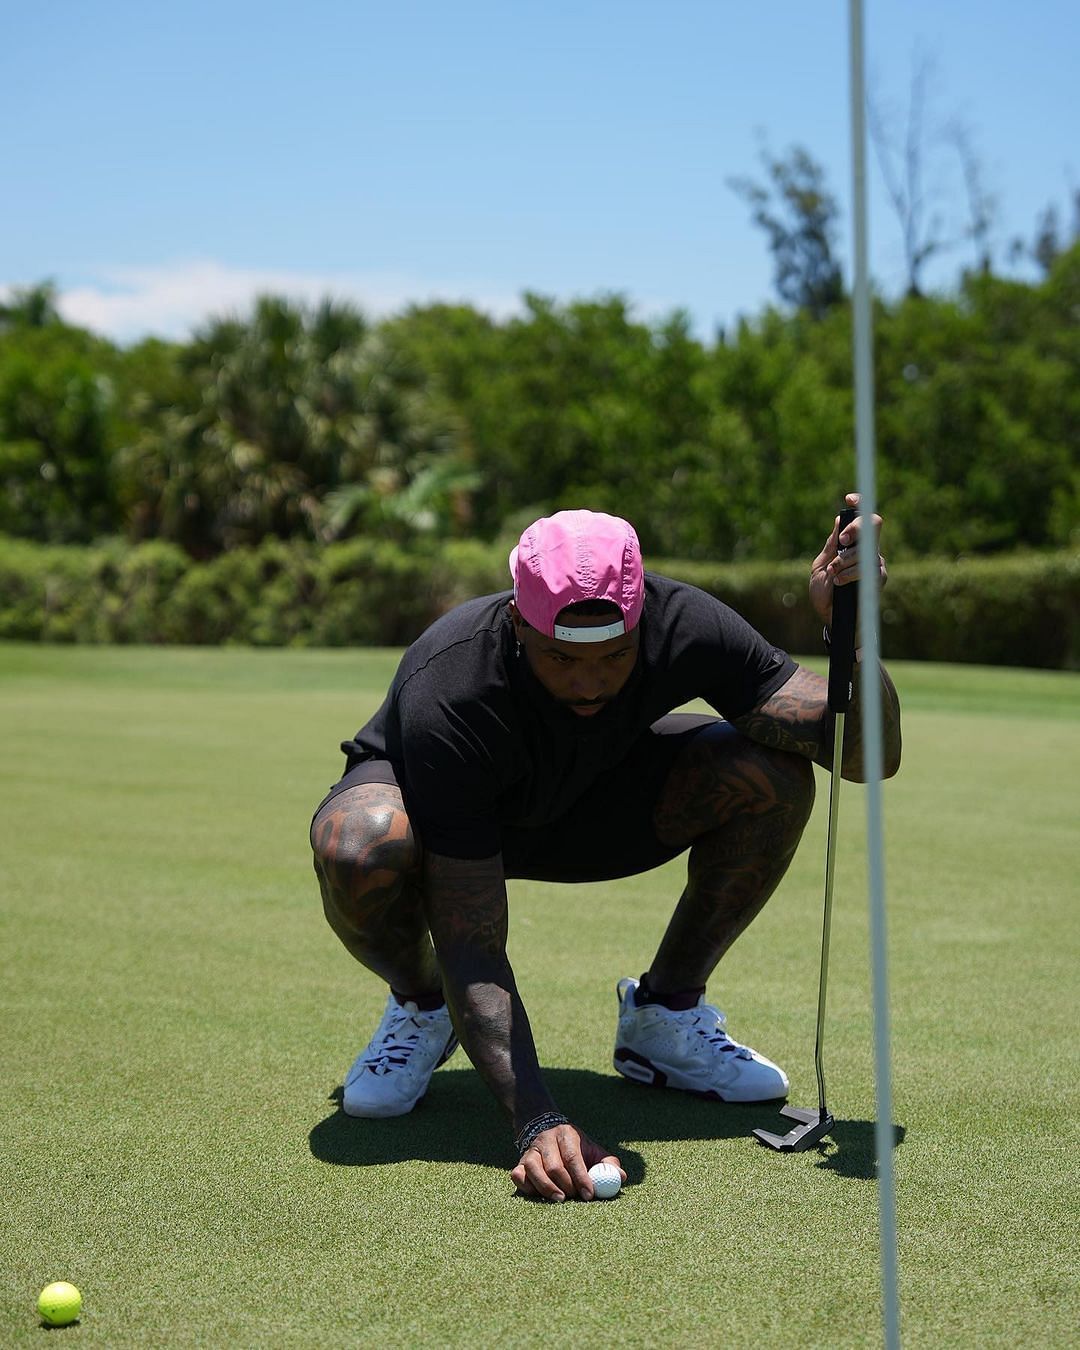 IN PHOTOS: Odell Beckham Jr. enjoys golf outing with DJ Khaled following  $15M move to Ravens